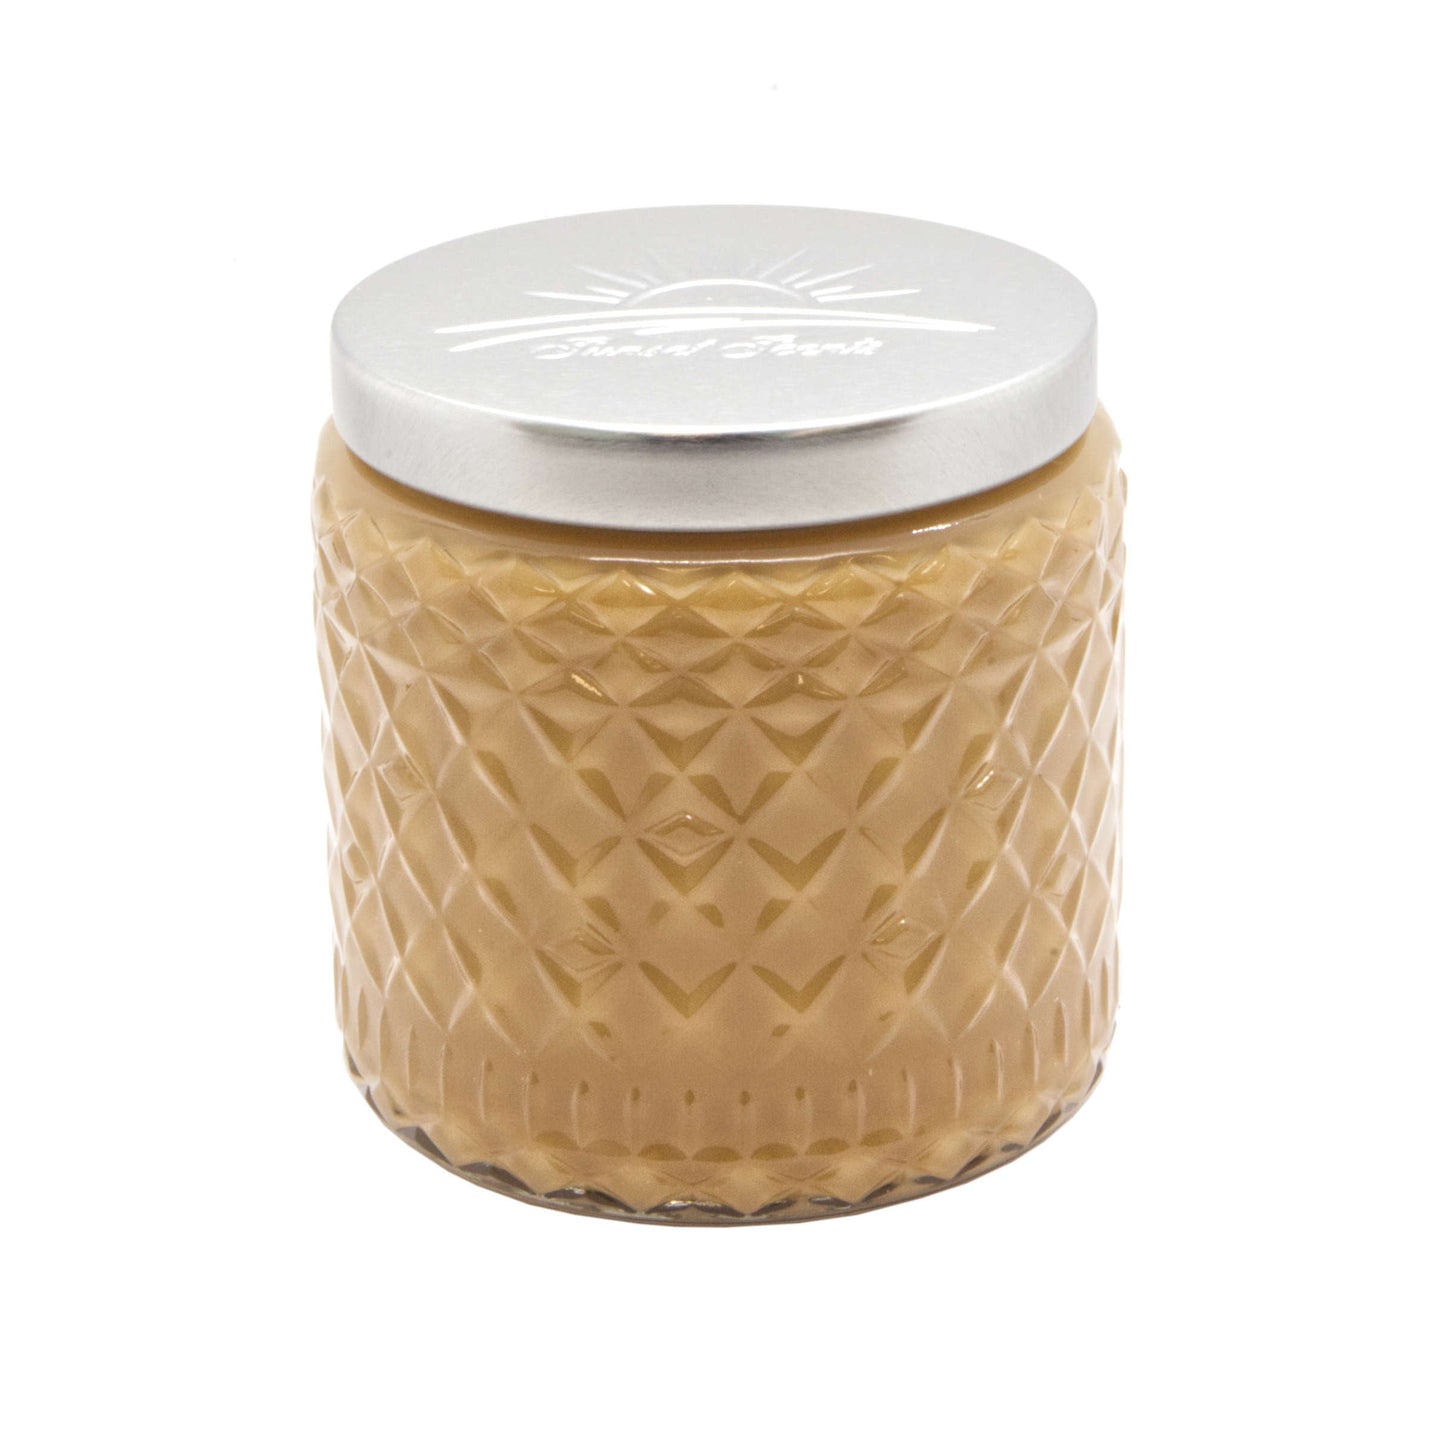 Hot Apple Cider Scented Candle